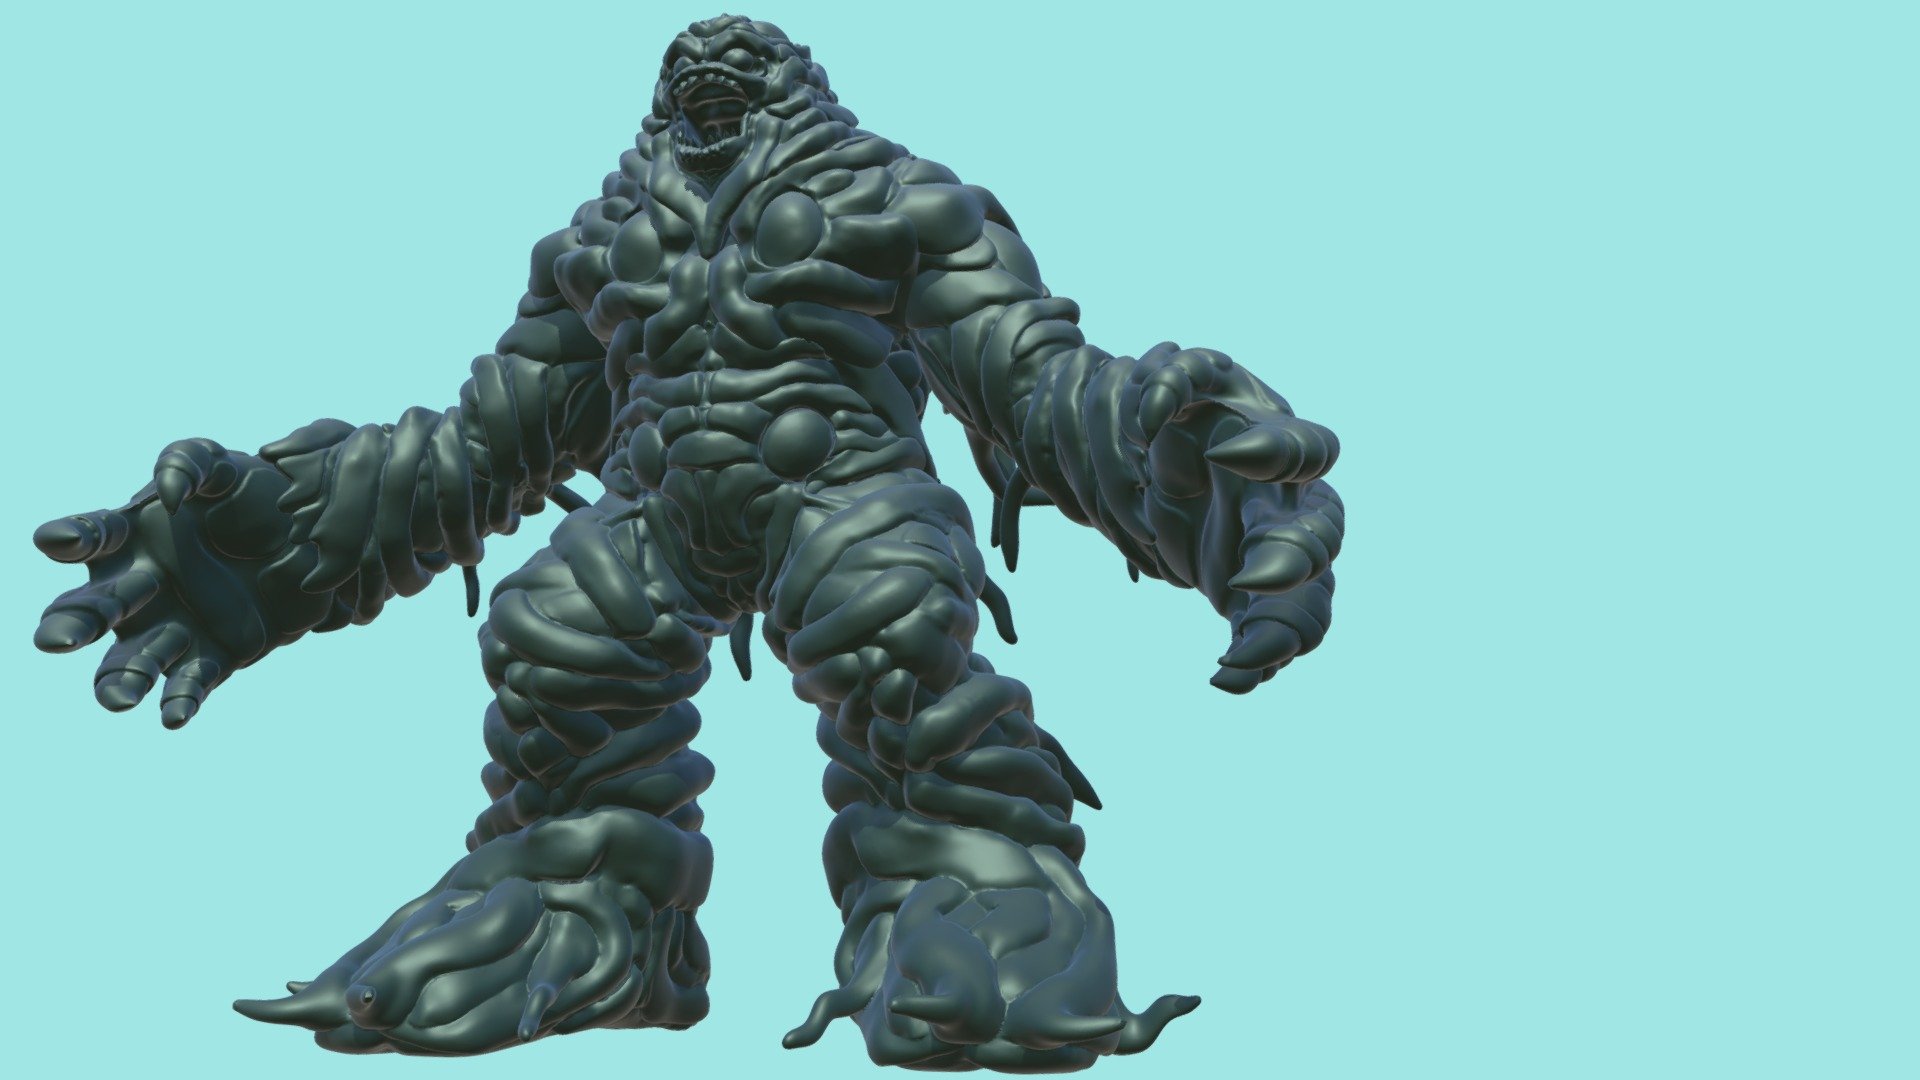 Sculptris hates me when I try creating forms like this! - Umibozu - 3D model by Mr Jay (@mrjay) 3d model